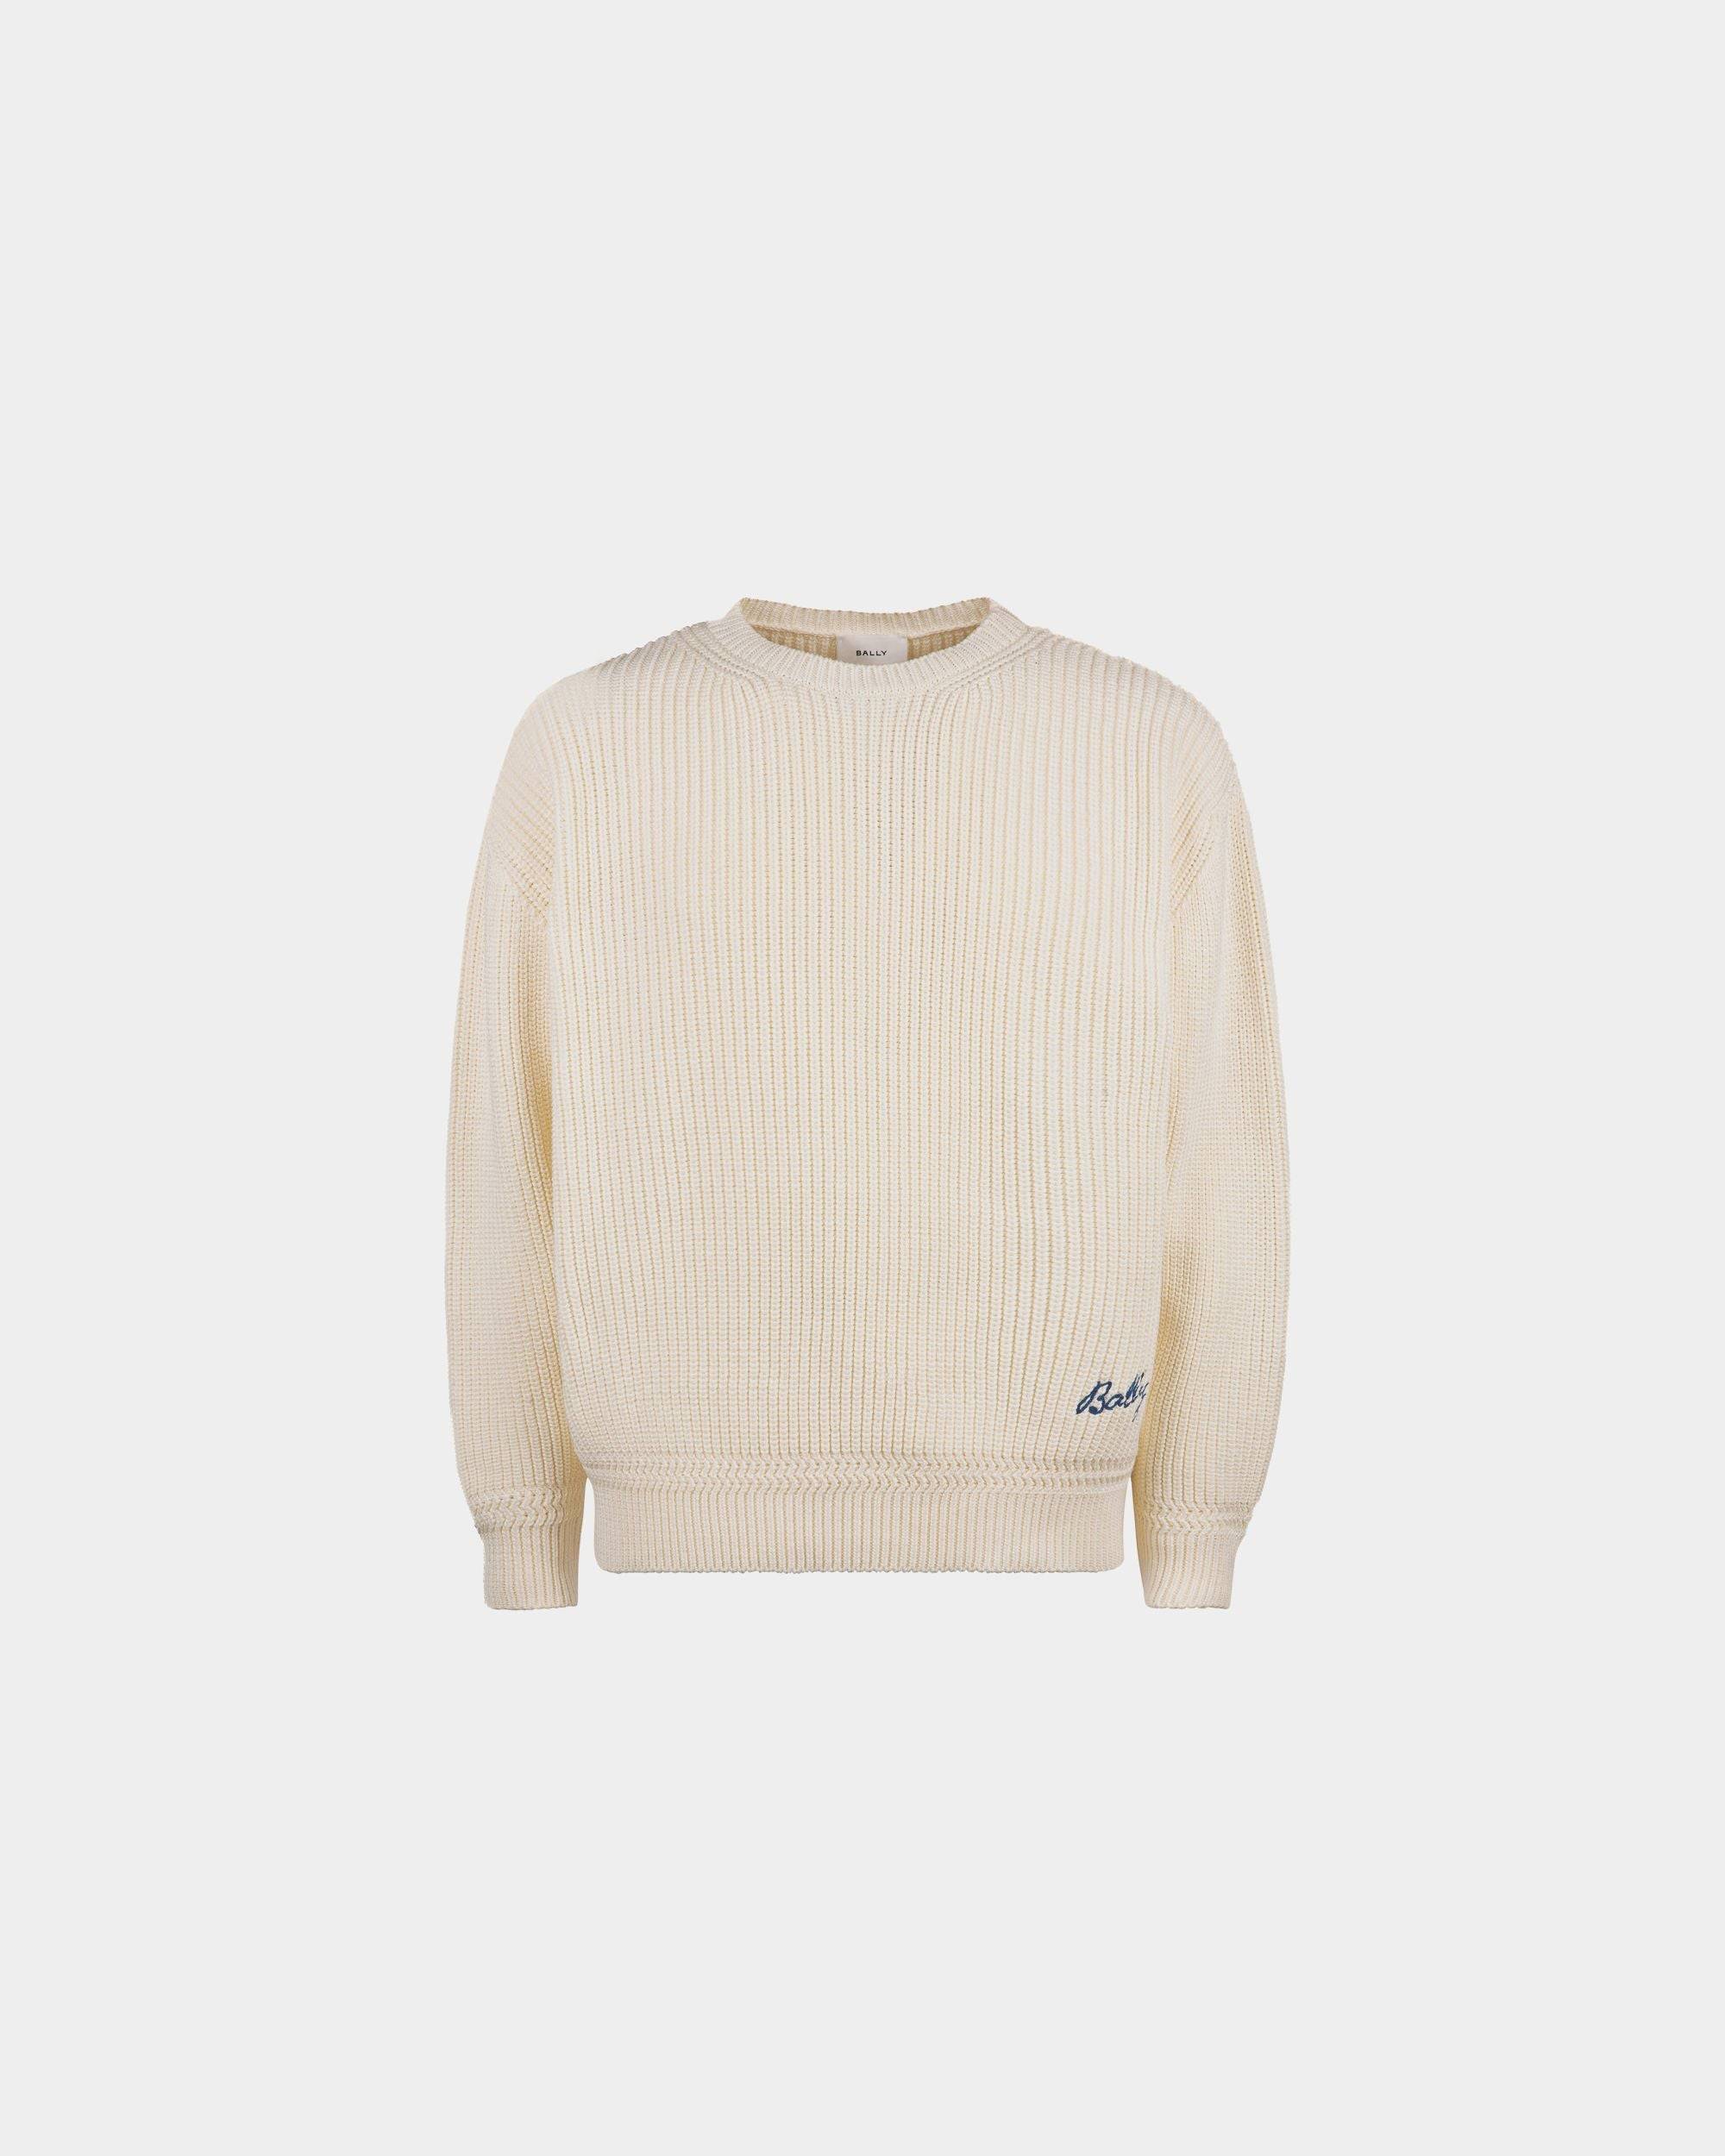 Men's Crewneck Sweater in Cotton | Bally | Still Life Front